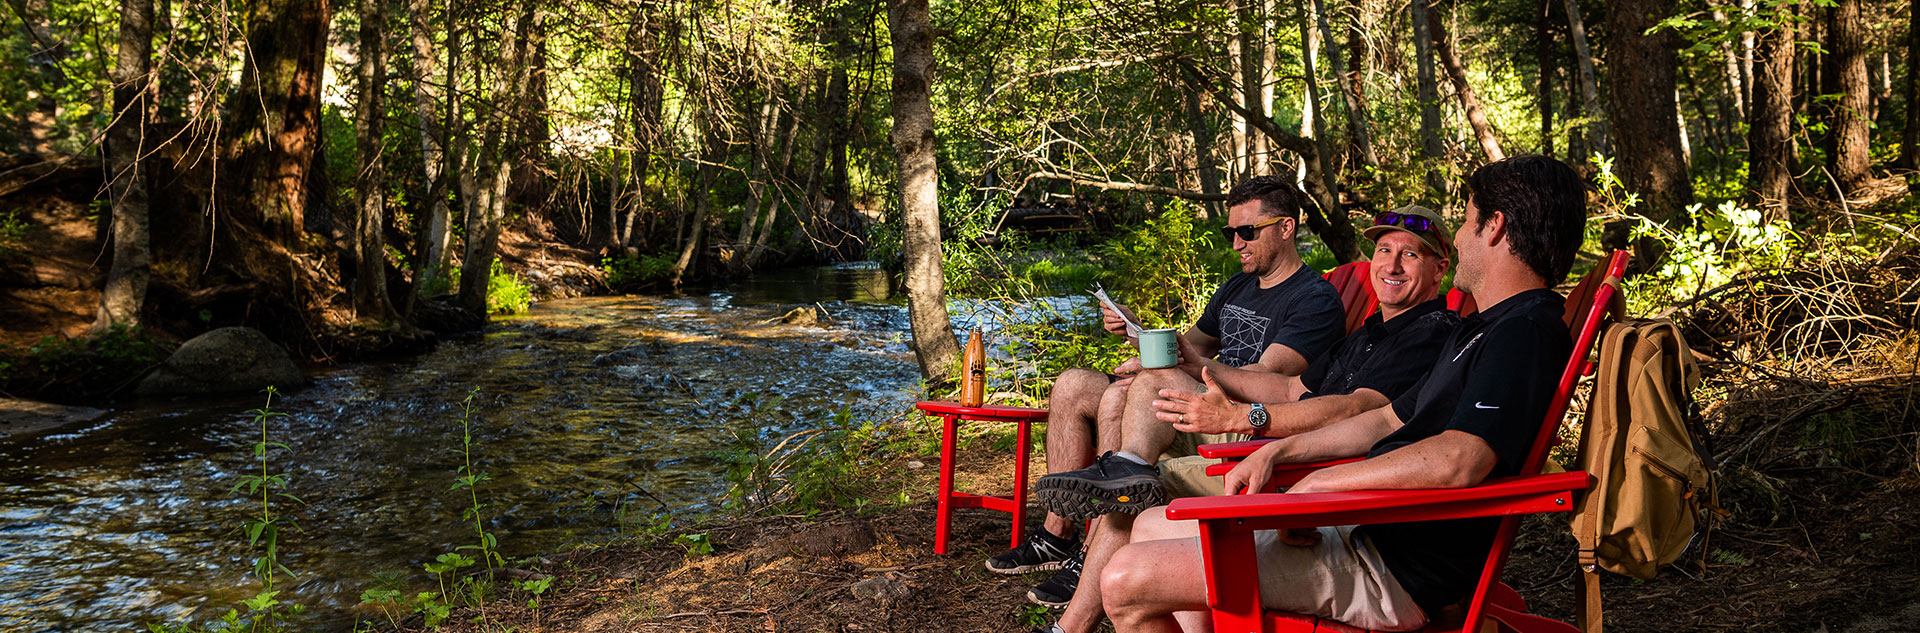 Three men sitting on red wooden chairs enjoying a chat out in the outdoors.